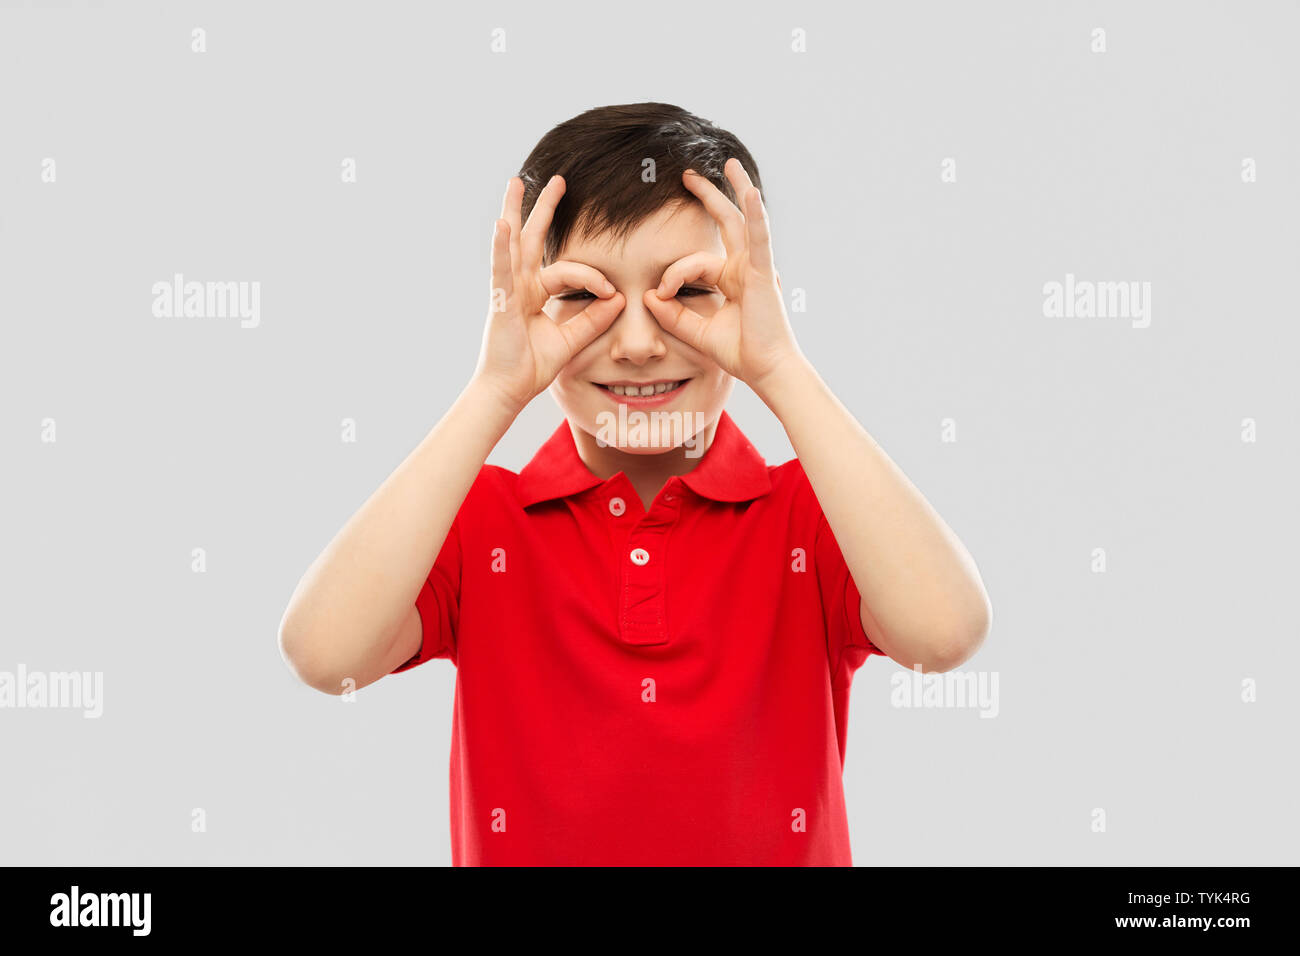 boy in red t-shirt looking through finger glasses Stock Photo